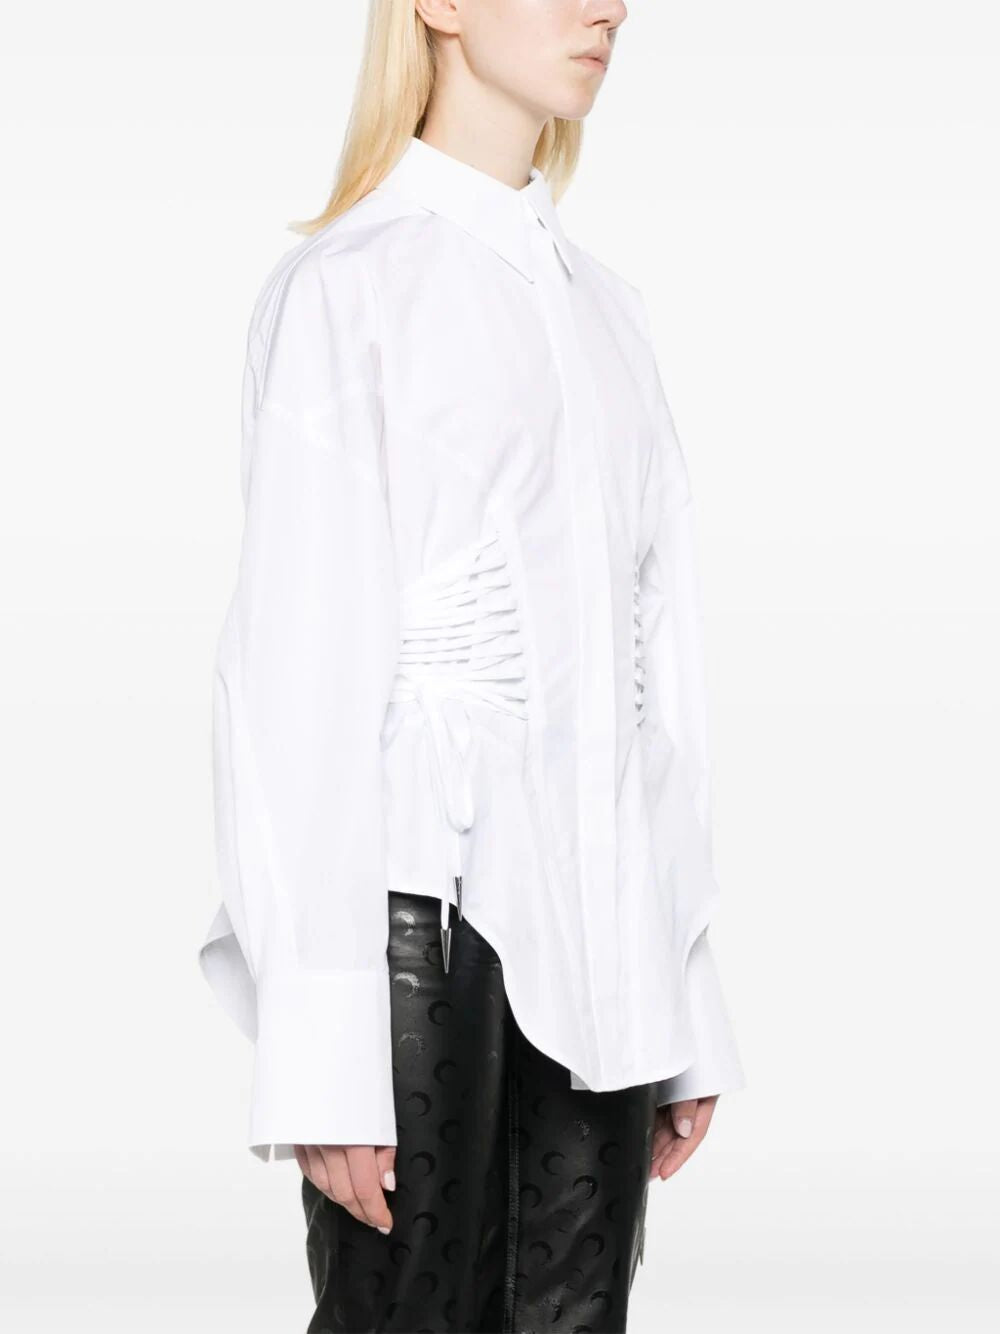 MUGLER Laced Up Shirt in White for Women - FW23 Collection